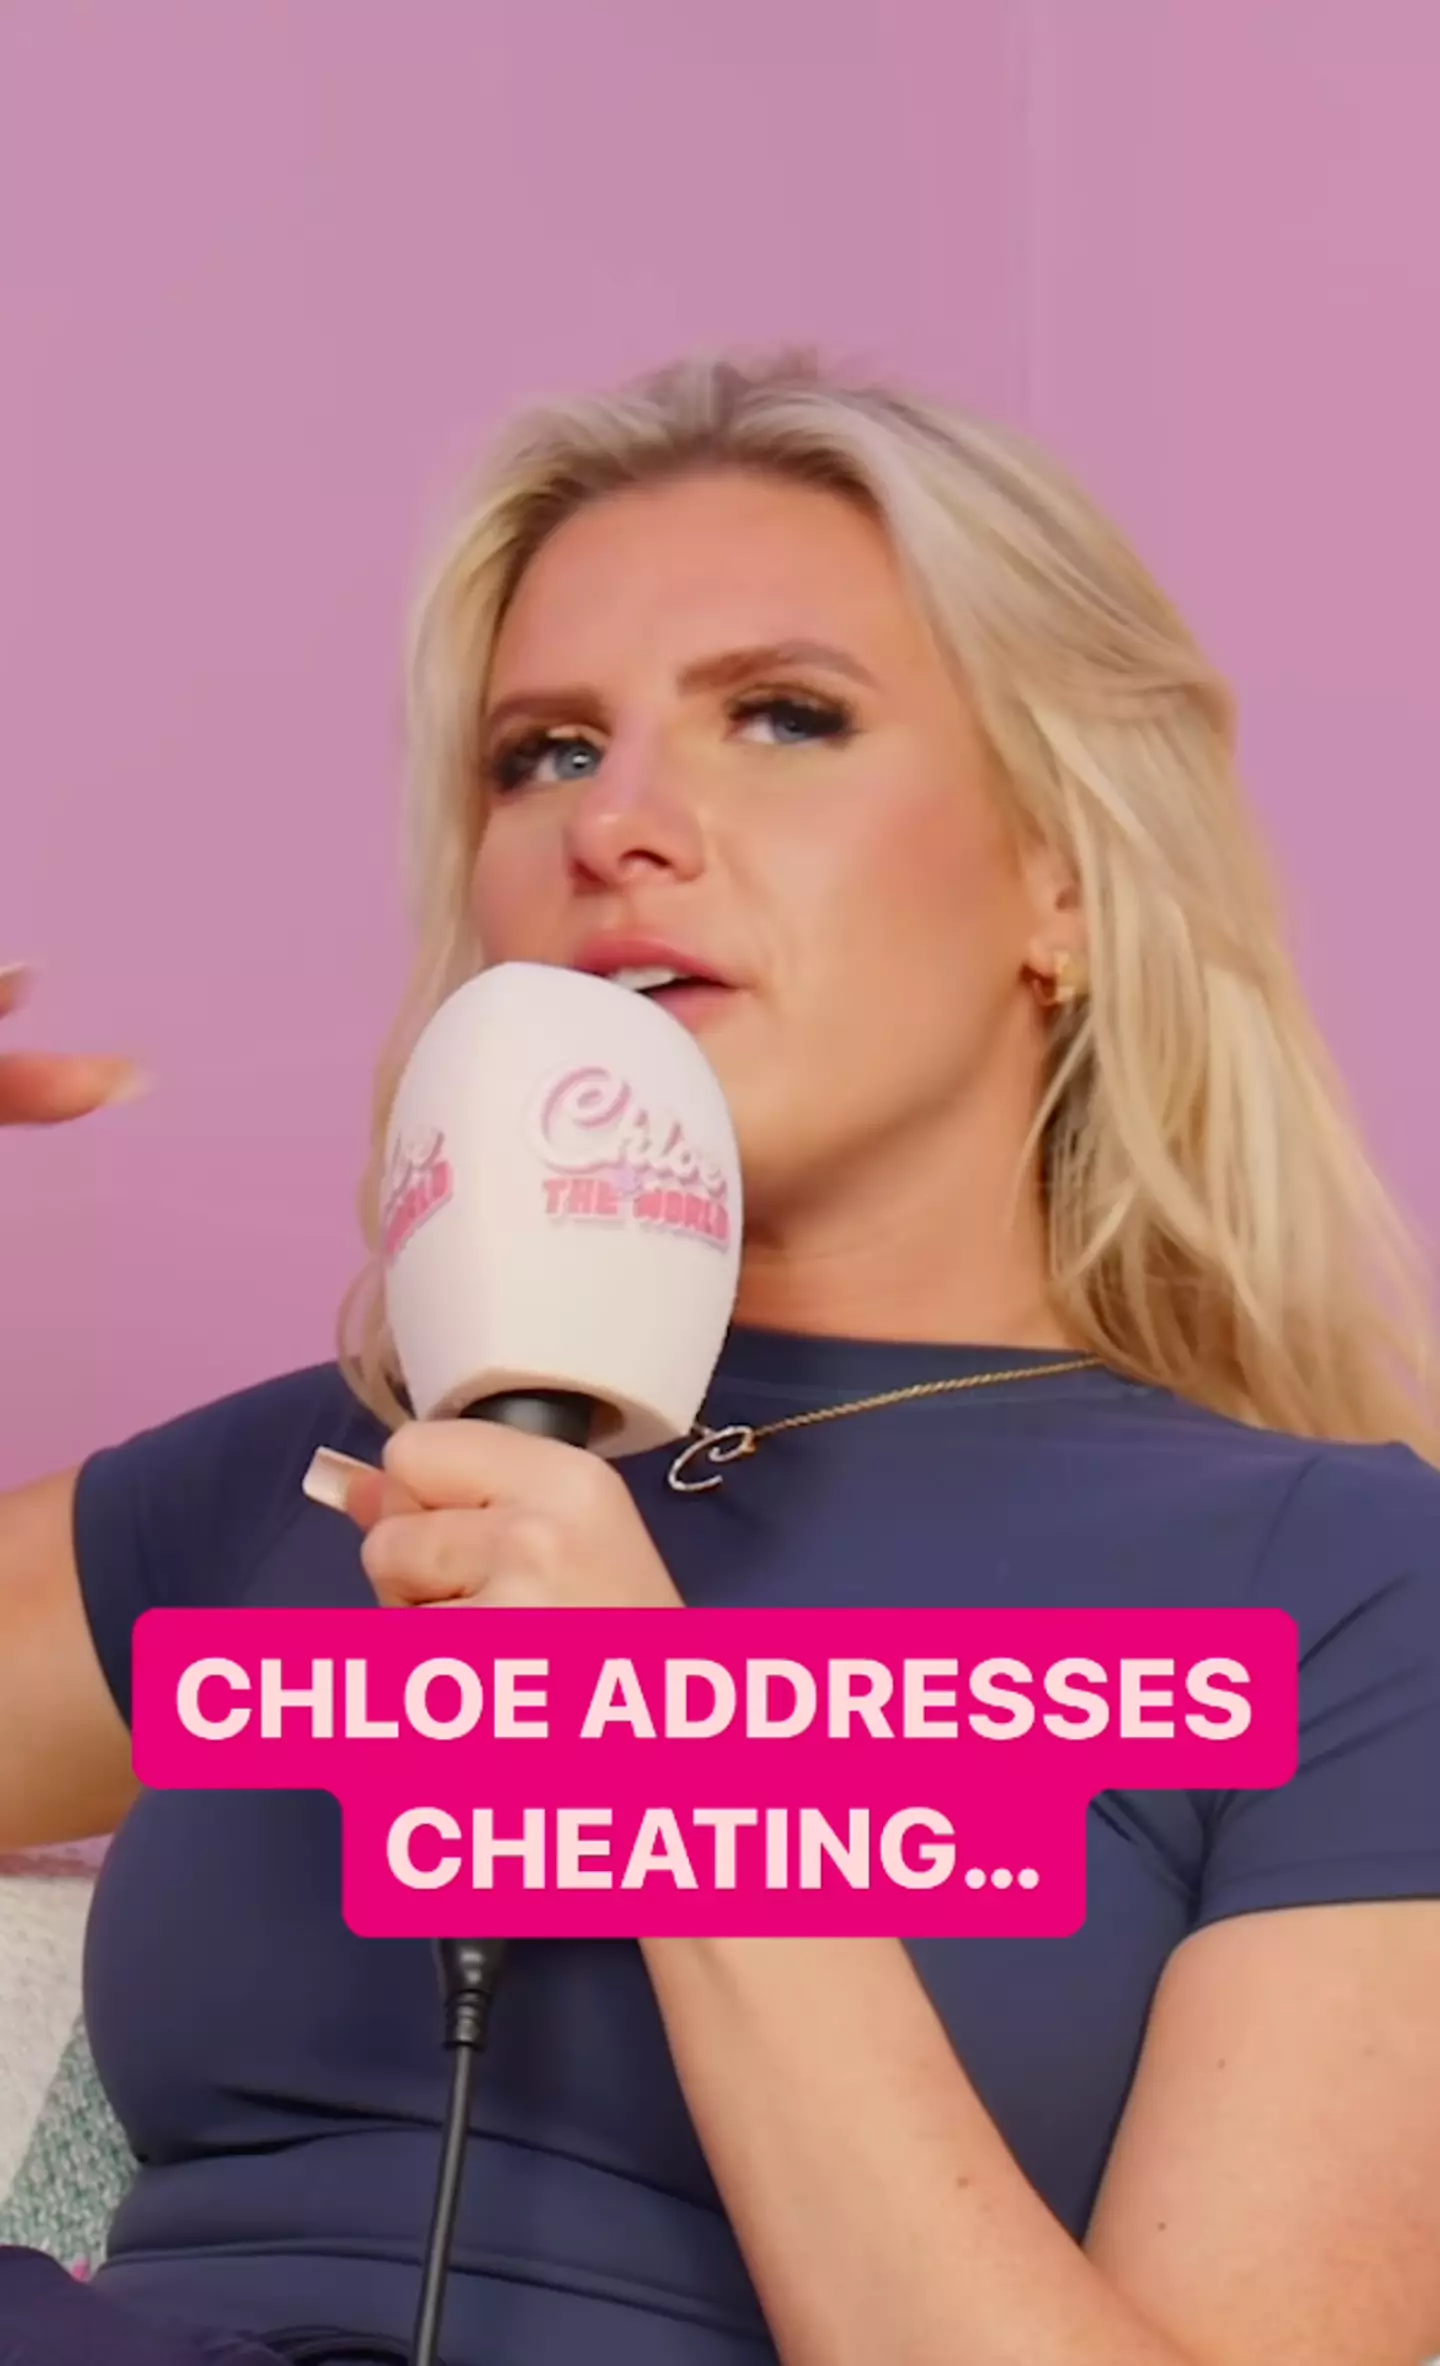 Chloe claimed she'd 'never cheat' on her podcast.